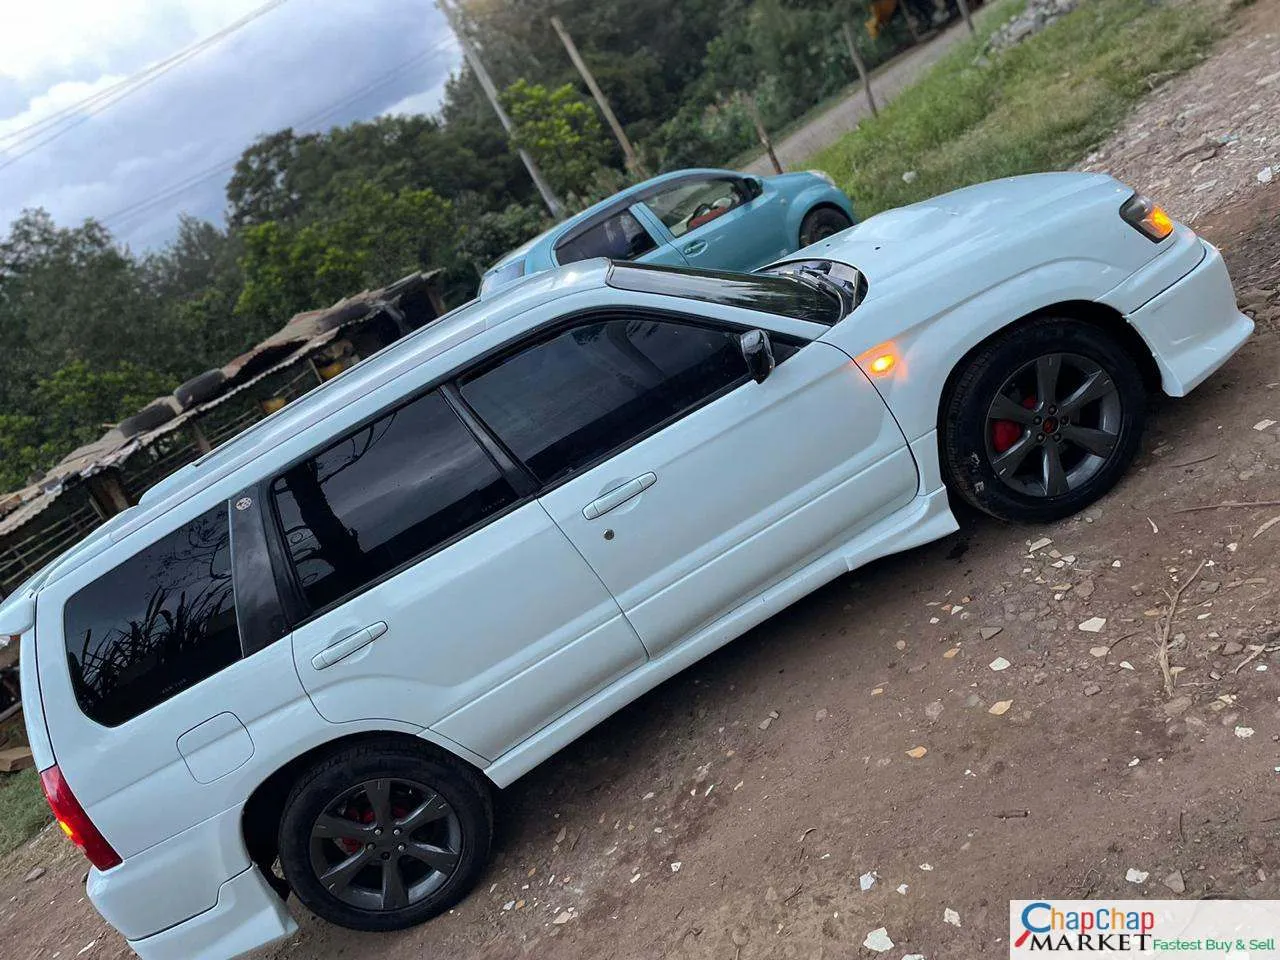 Cars Cars For Sale-Subaru Forester Kenya🔥 You Pay 30% deposit Trade in Ok Forester for sale in kenya hire purchase installments EXCLUSIVE Turbo charged 4